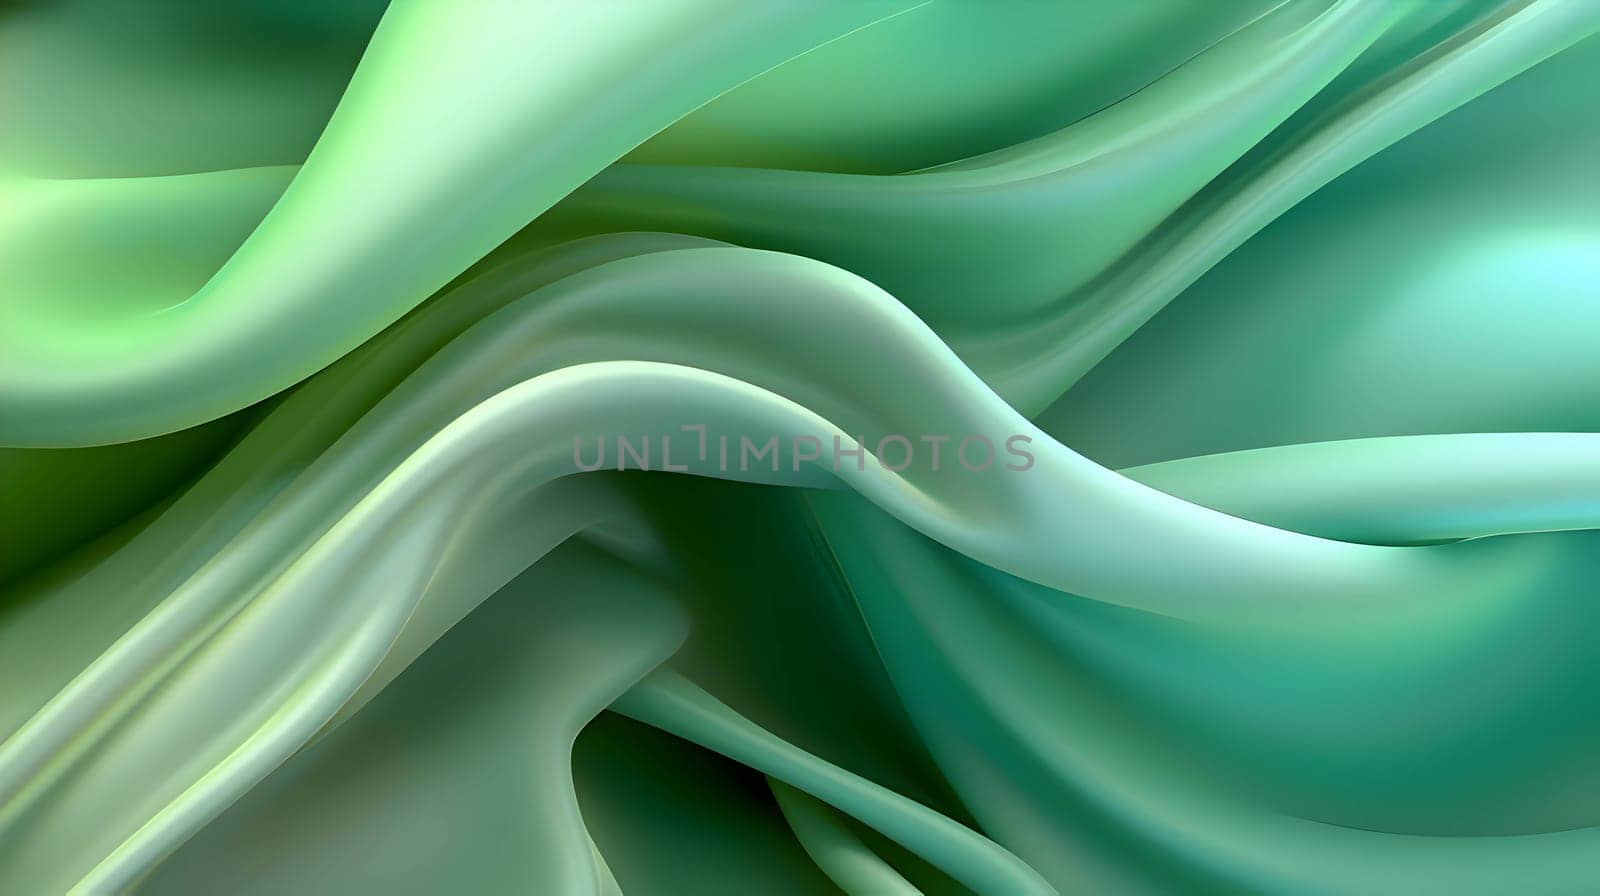 Folds of sky green silk fabric texture as abstract background wallpaper. by ThemesS